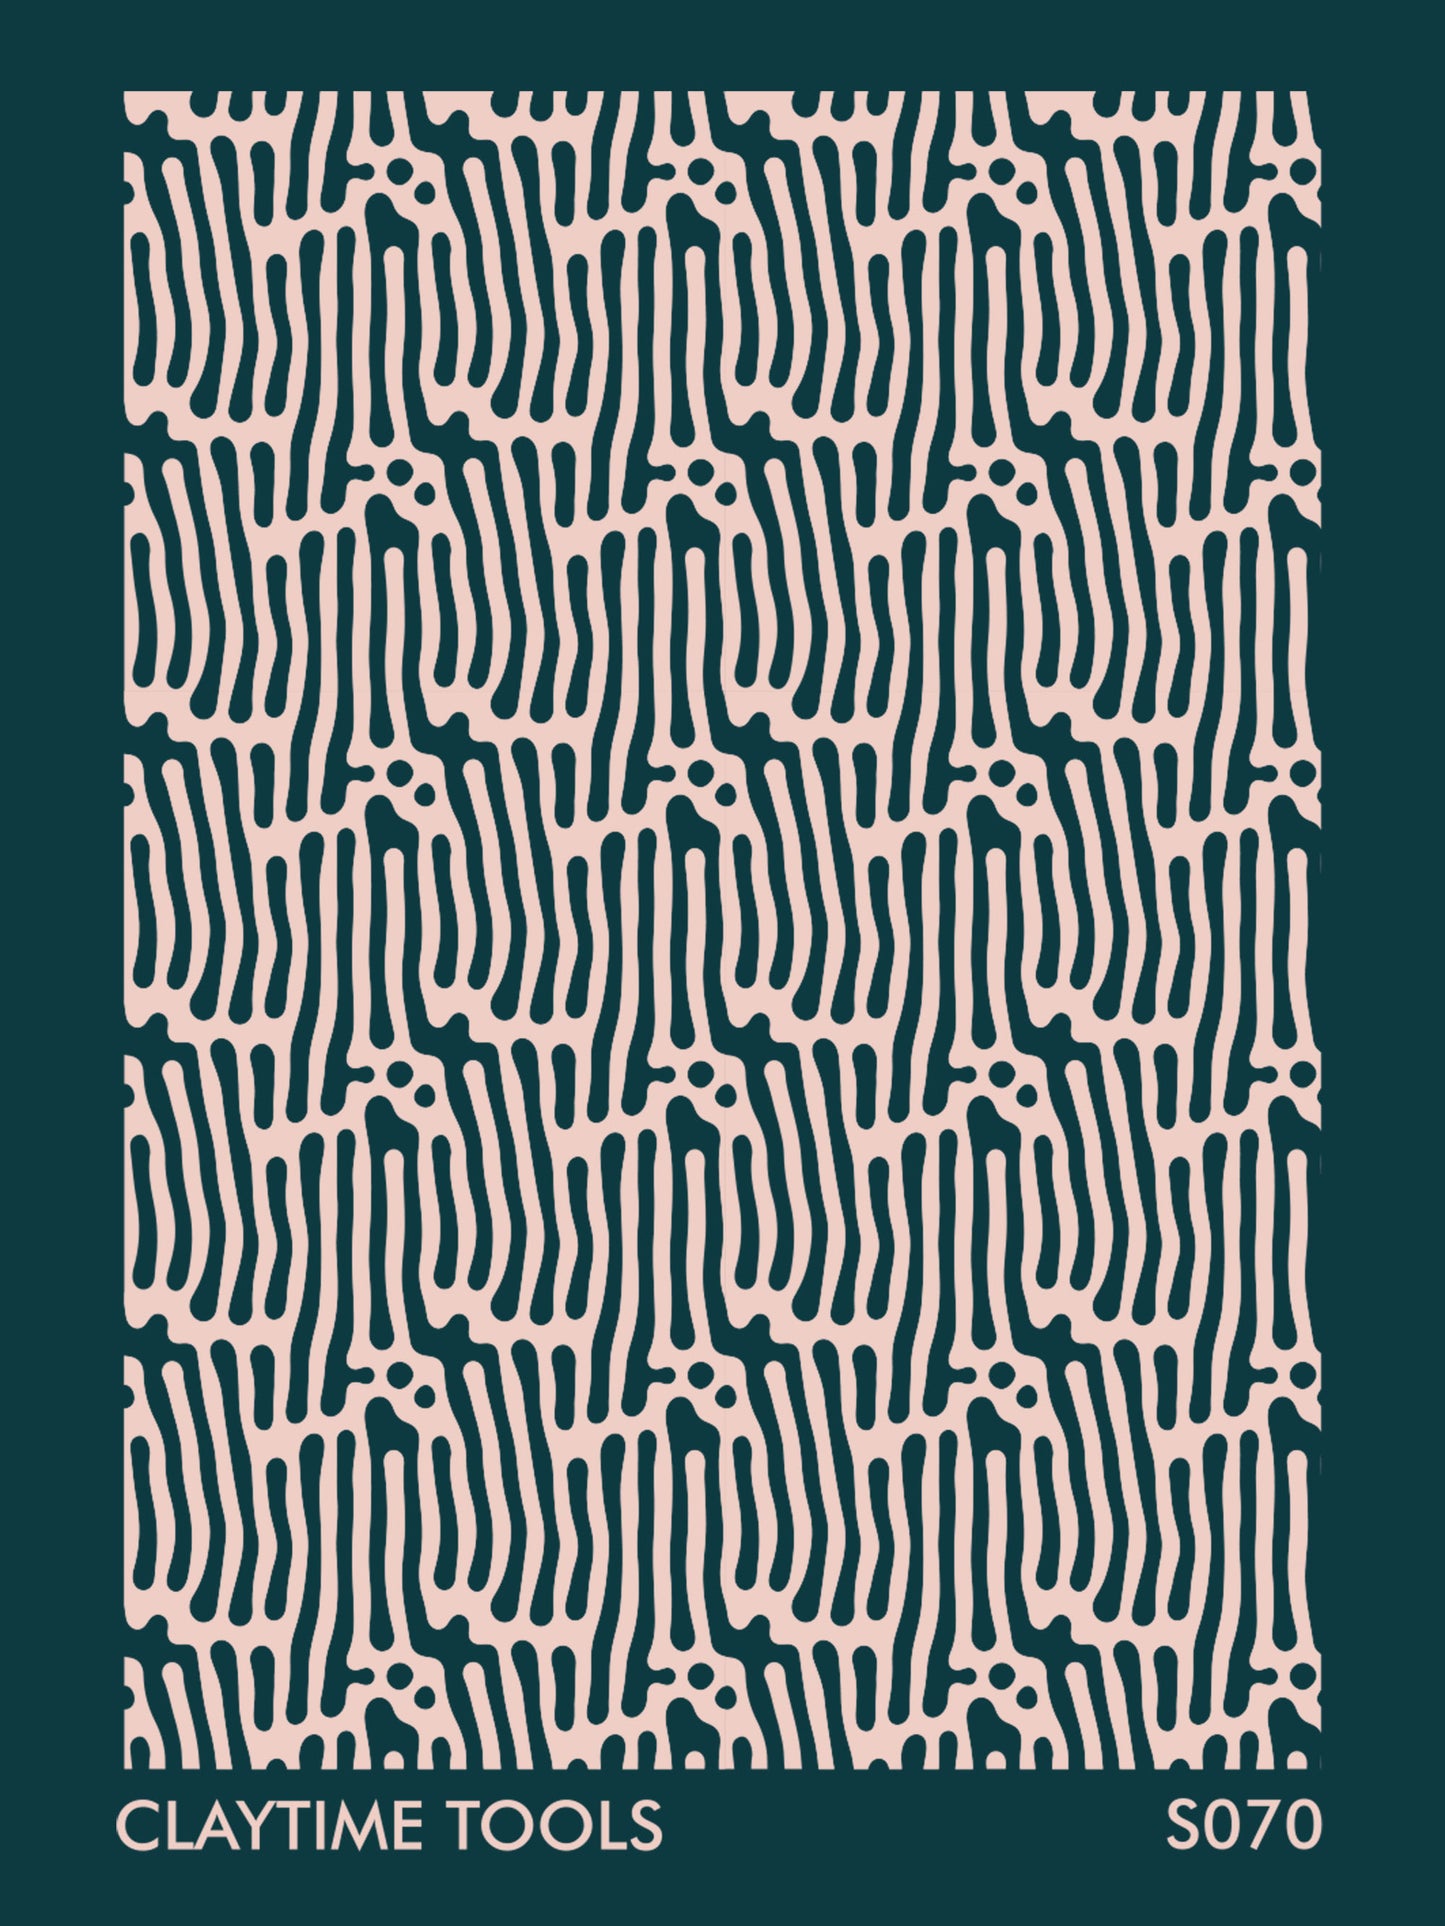 Image of a silkscreen print featuring abstract, organic patterns.